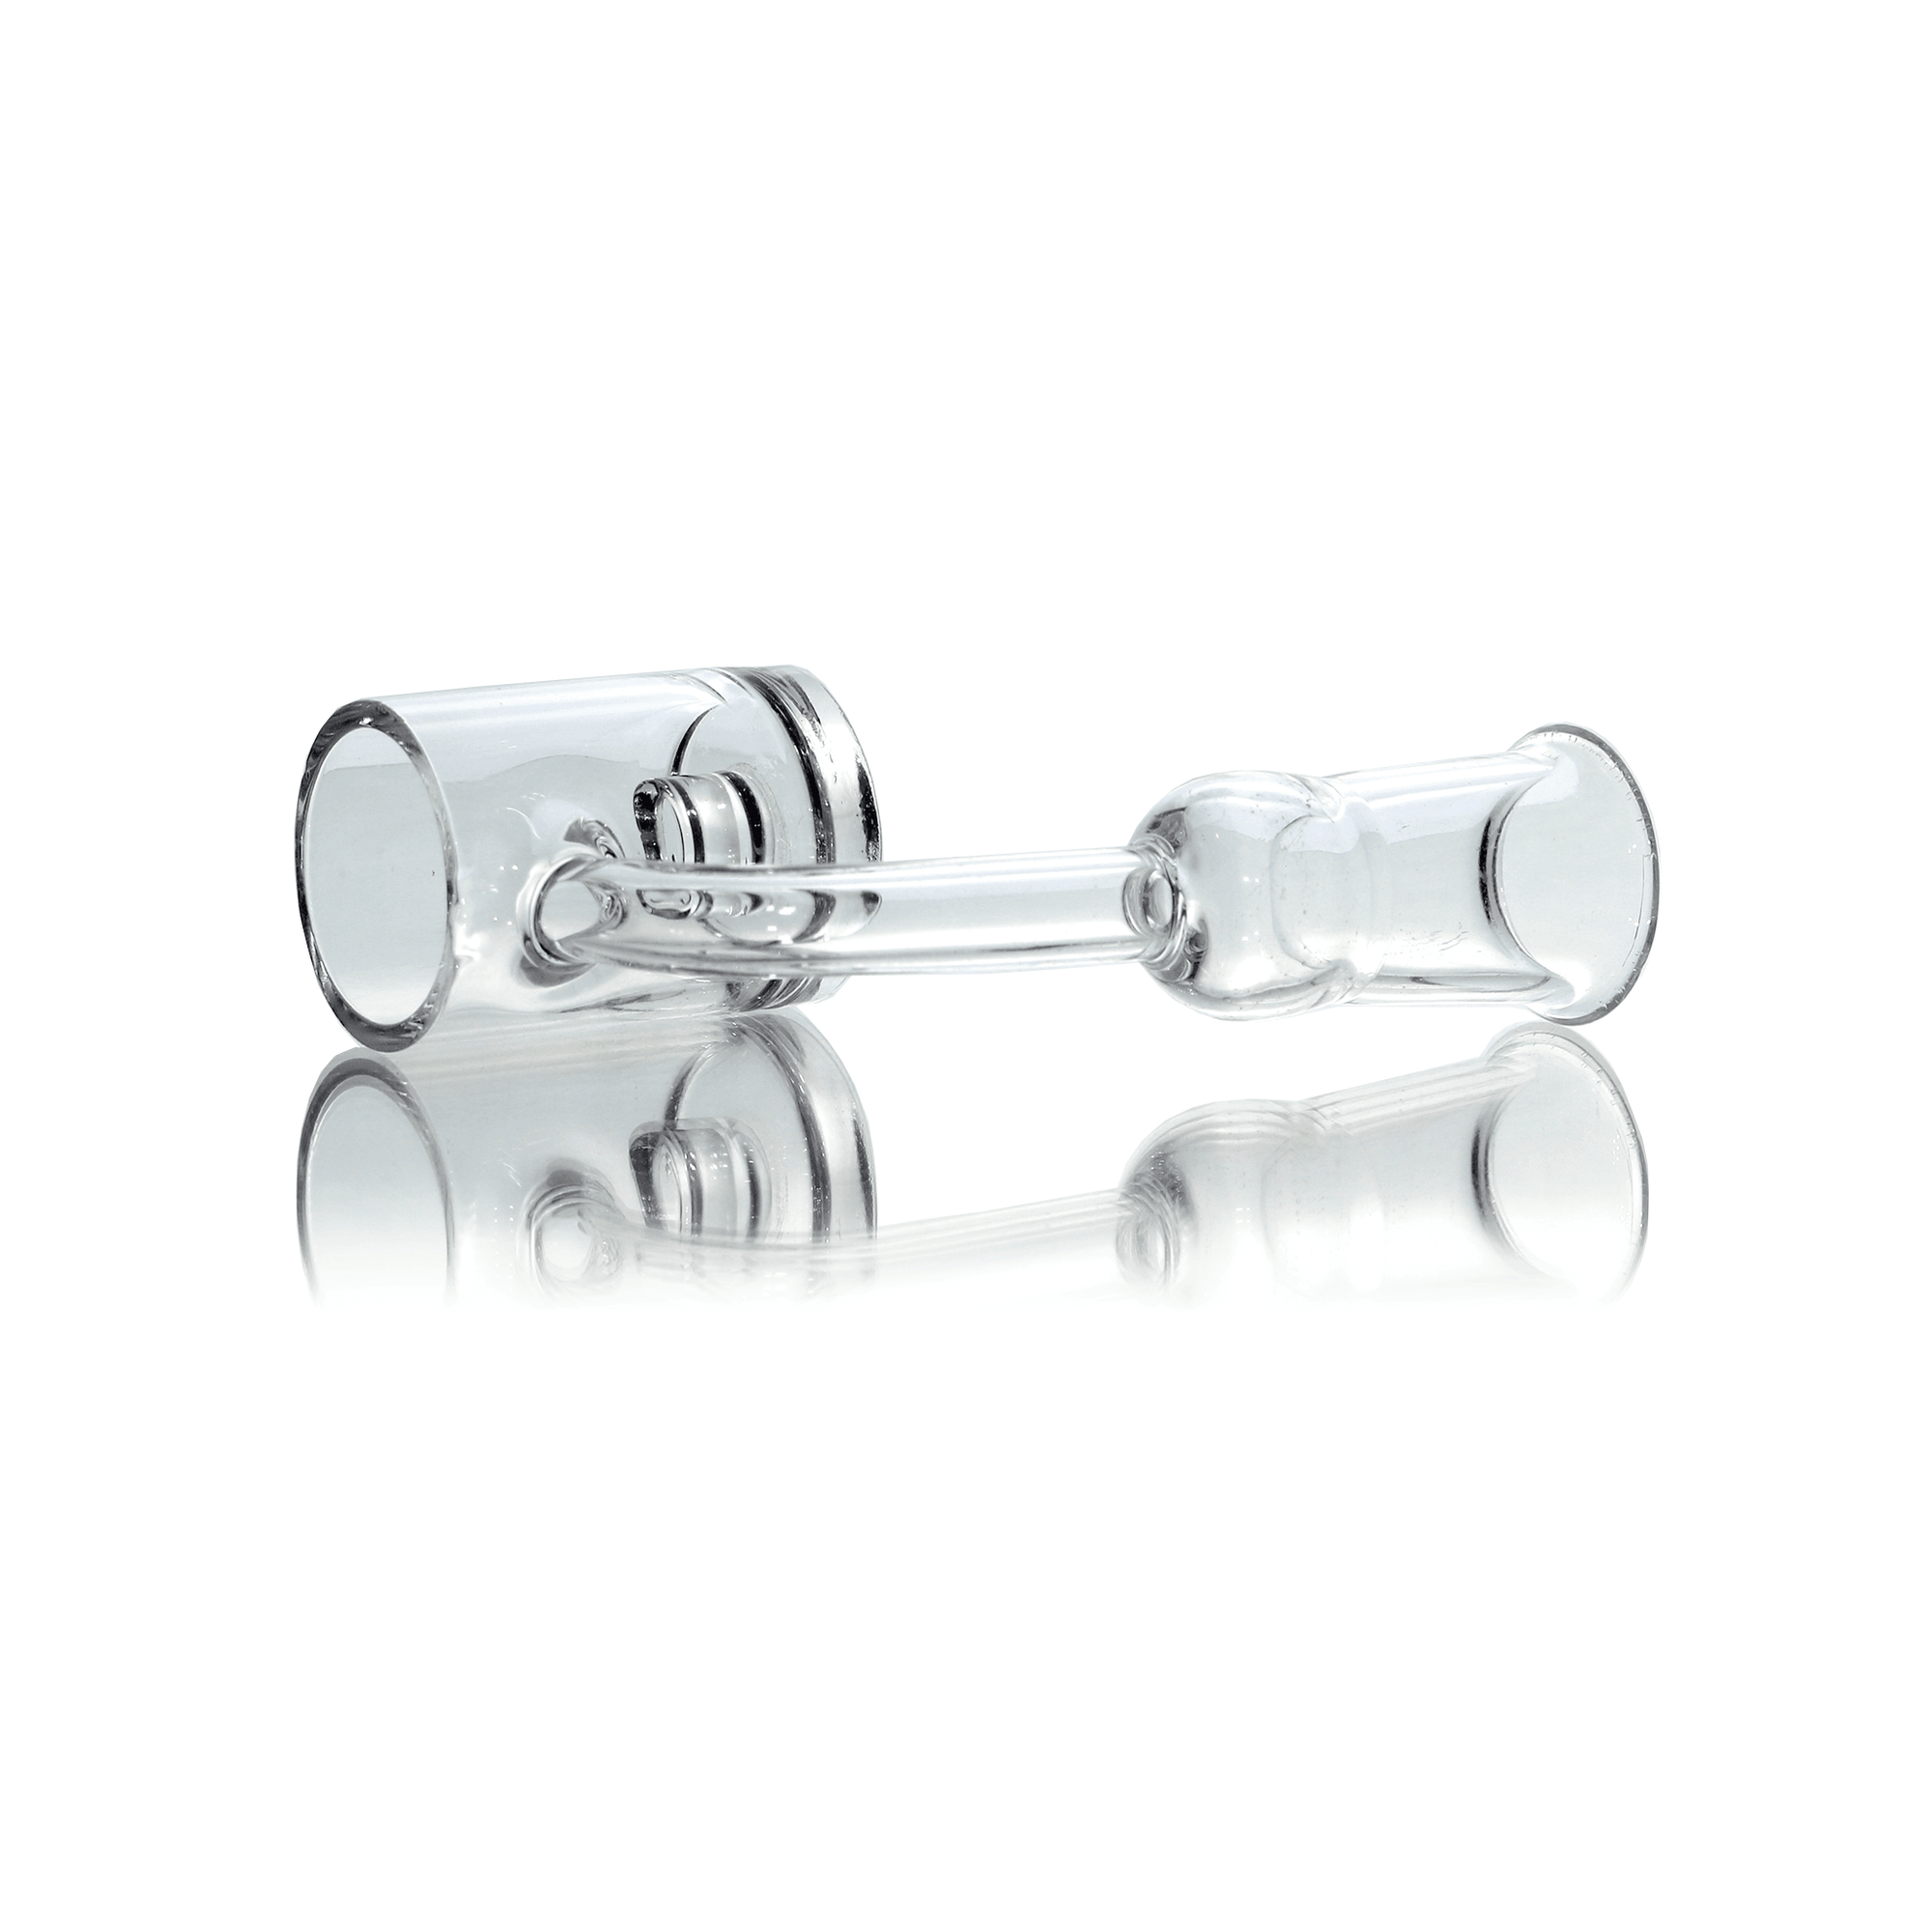 Quartz Banger Core Reactor 14mm Female With Saucer Cap | Prone Banger View | the dabbing specialists